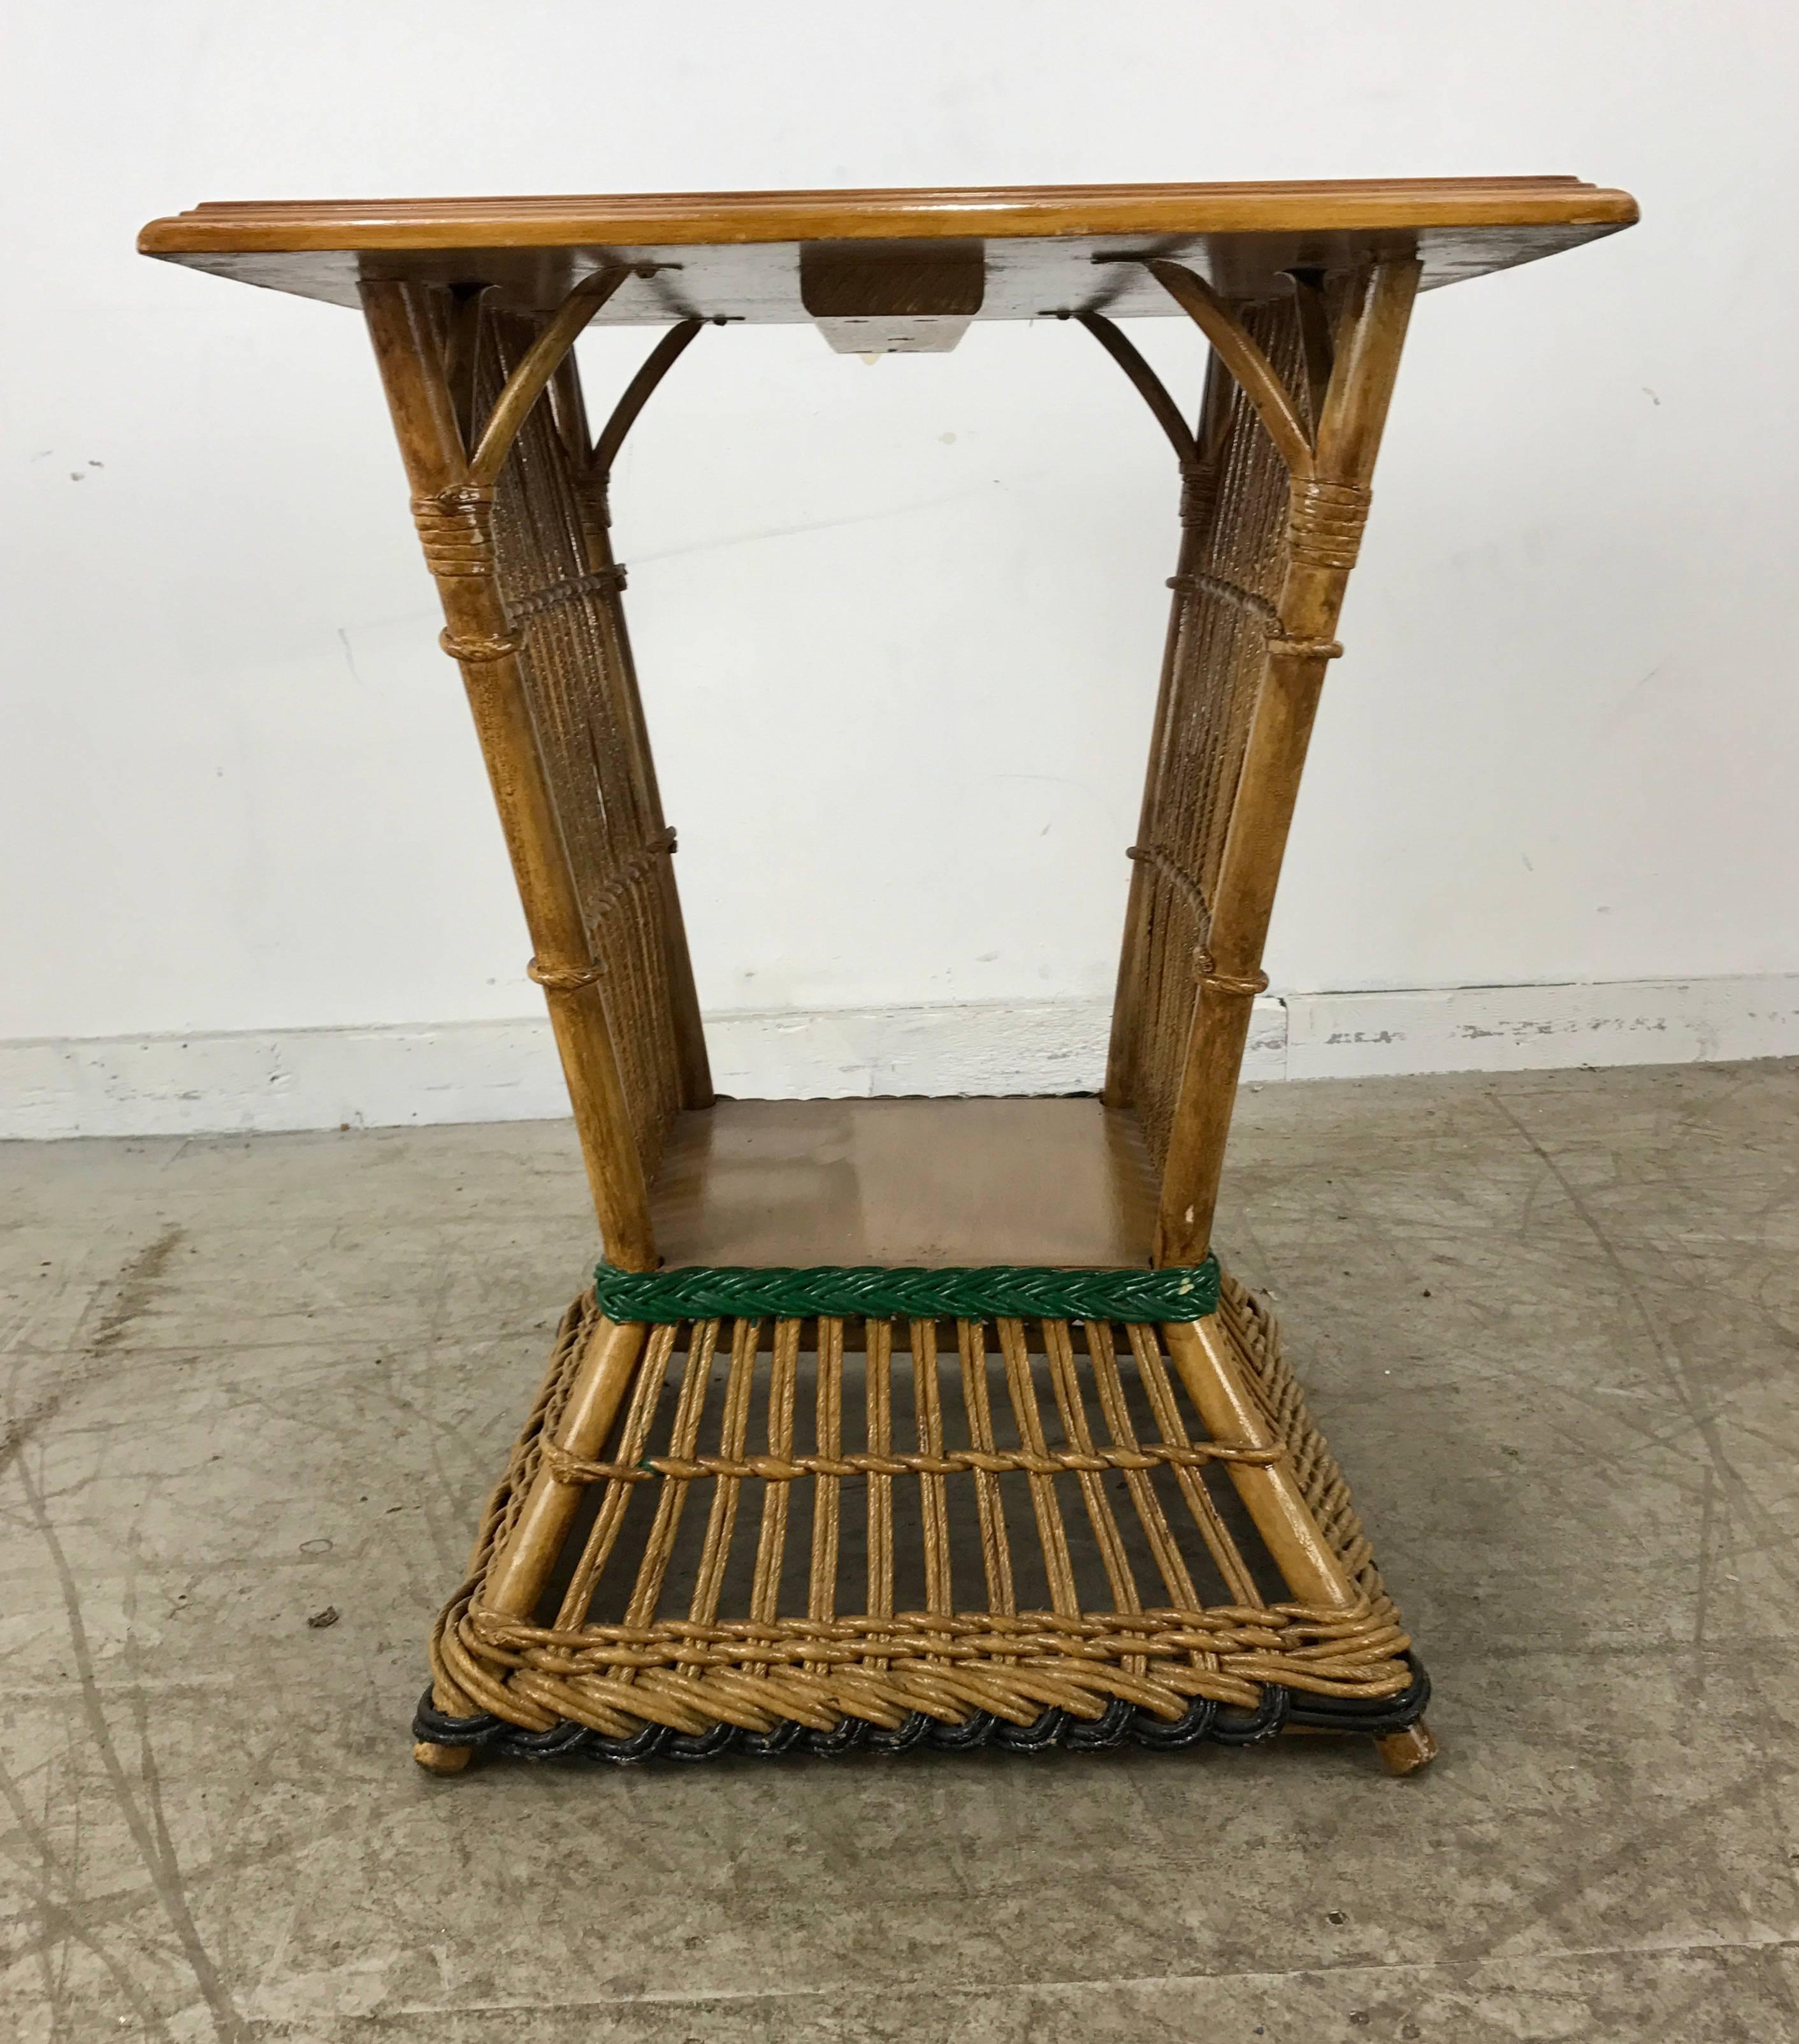 Stunning Art Deco split reed or stick wicker table. Features natural finish with beautiful green and black paint detailing. Also retains original spring cushions, stunning Art Deco 